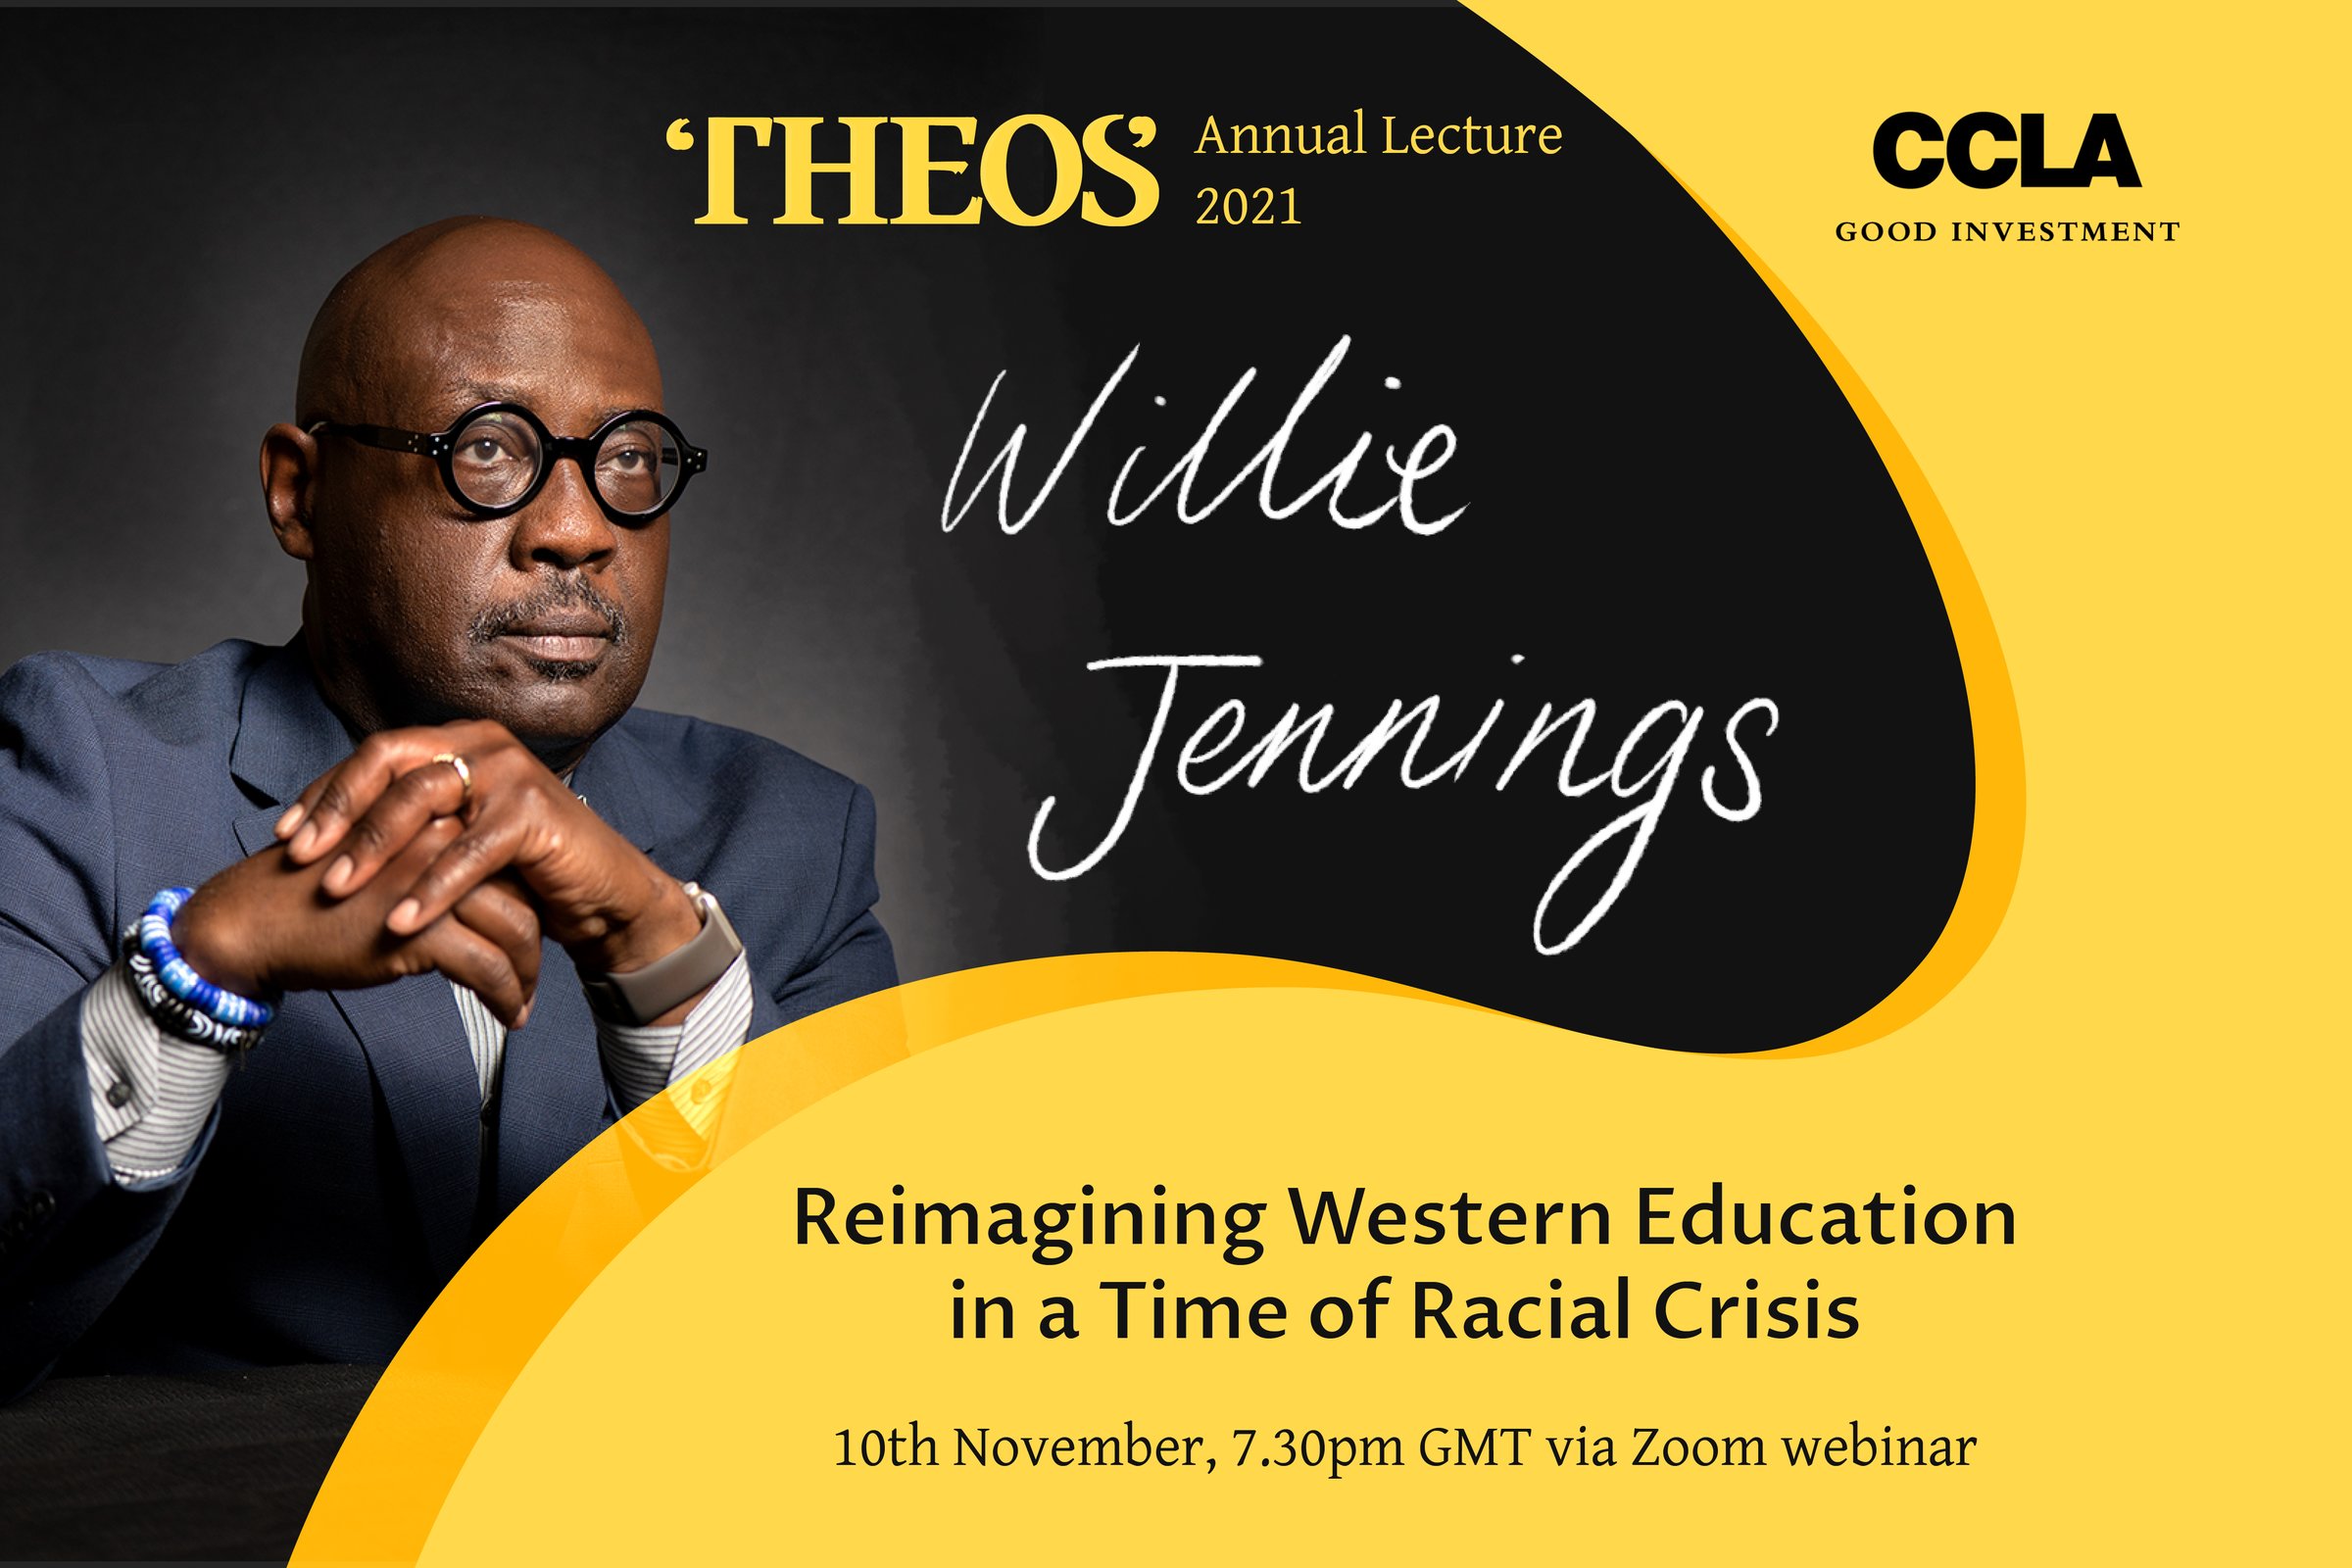 Theos Annual Lecture 2021: Reimagining Western Education in a Time of Racial Crisis with Willie Jennings